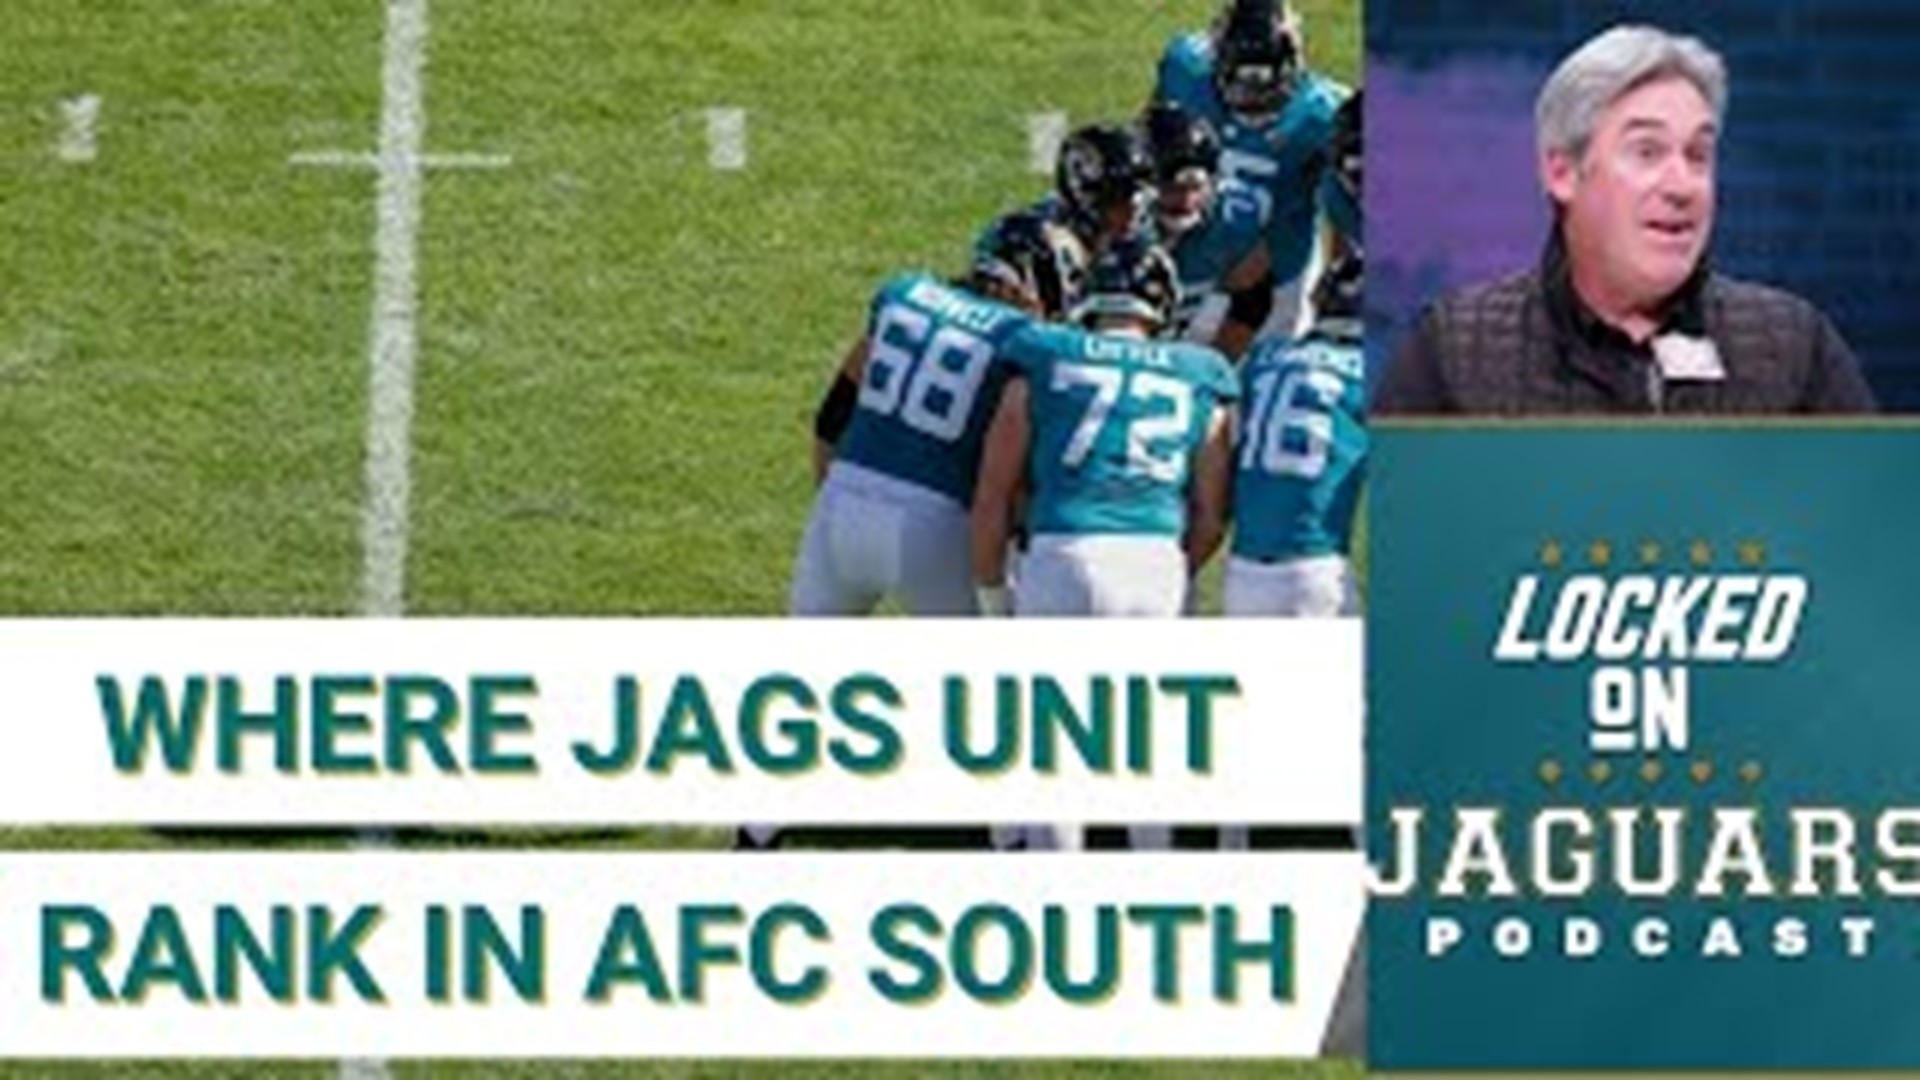 The Jaguars have improved enough on paper to warrant not being considered the worst at any position group or at head coach amongst teams in the AFC South.